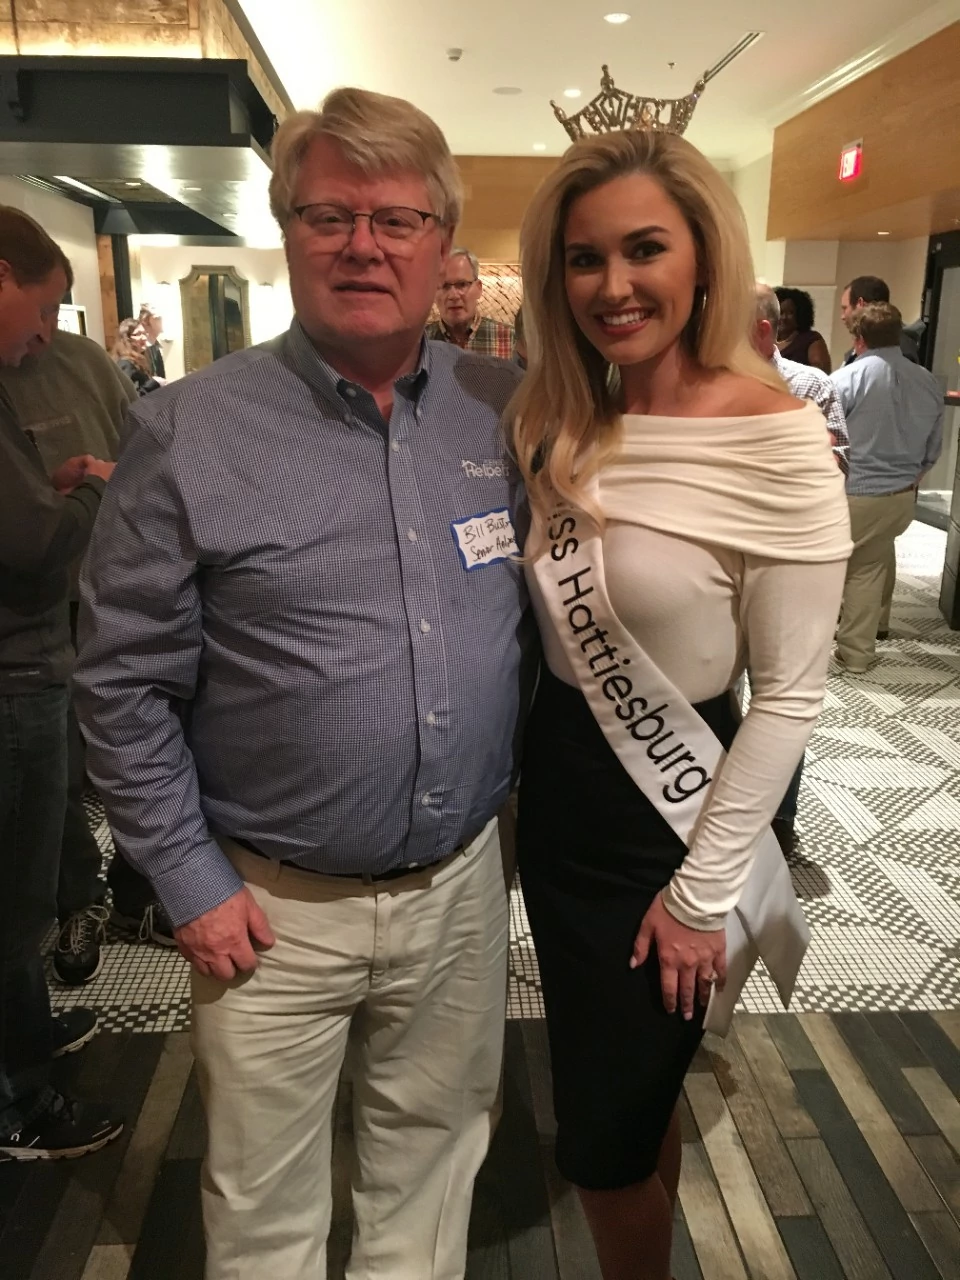 Owner Bill Bustin with Miss Hattiesburg Macy Mitchell. Miss Mitchell's platform is finding a cure for cancer.  At Senior Helpers of Hattiesburg, we know all too well how cancer treatment can affect our clients' quality of life and create a need for help with senior care at home.